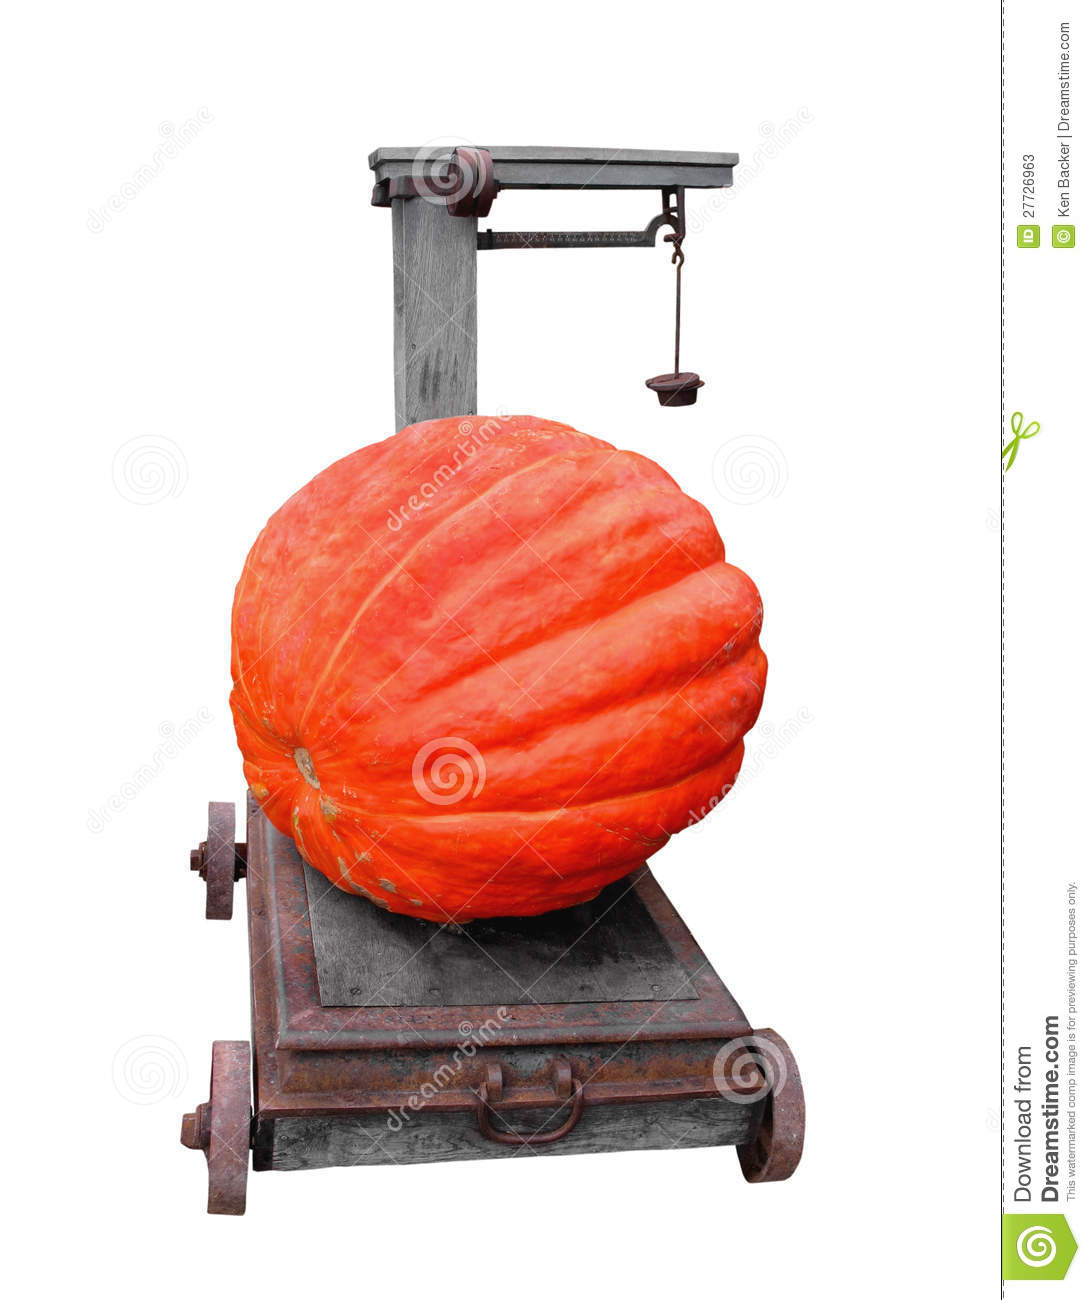 Large Pumpkin On A Cart Scale Isolated  Stock Photos   Image  27726963